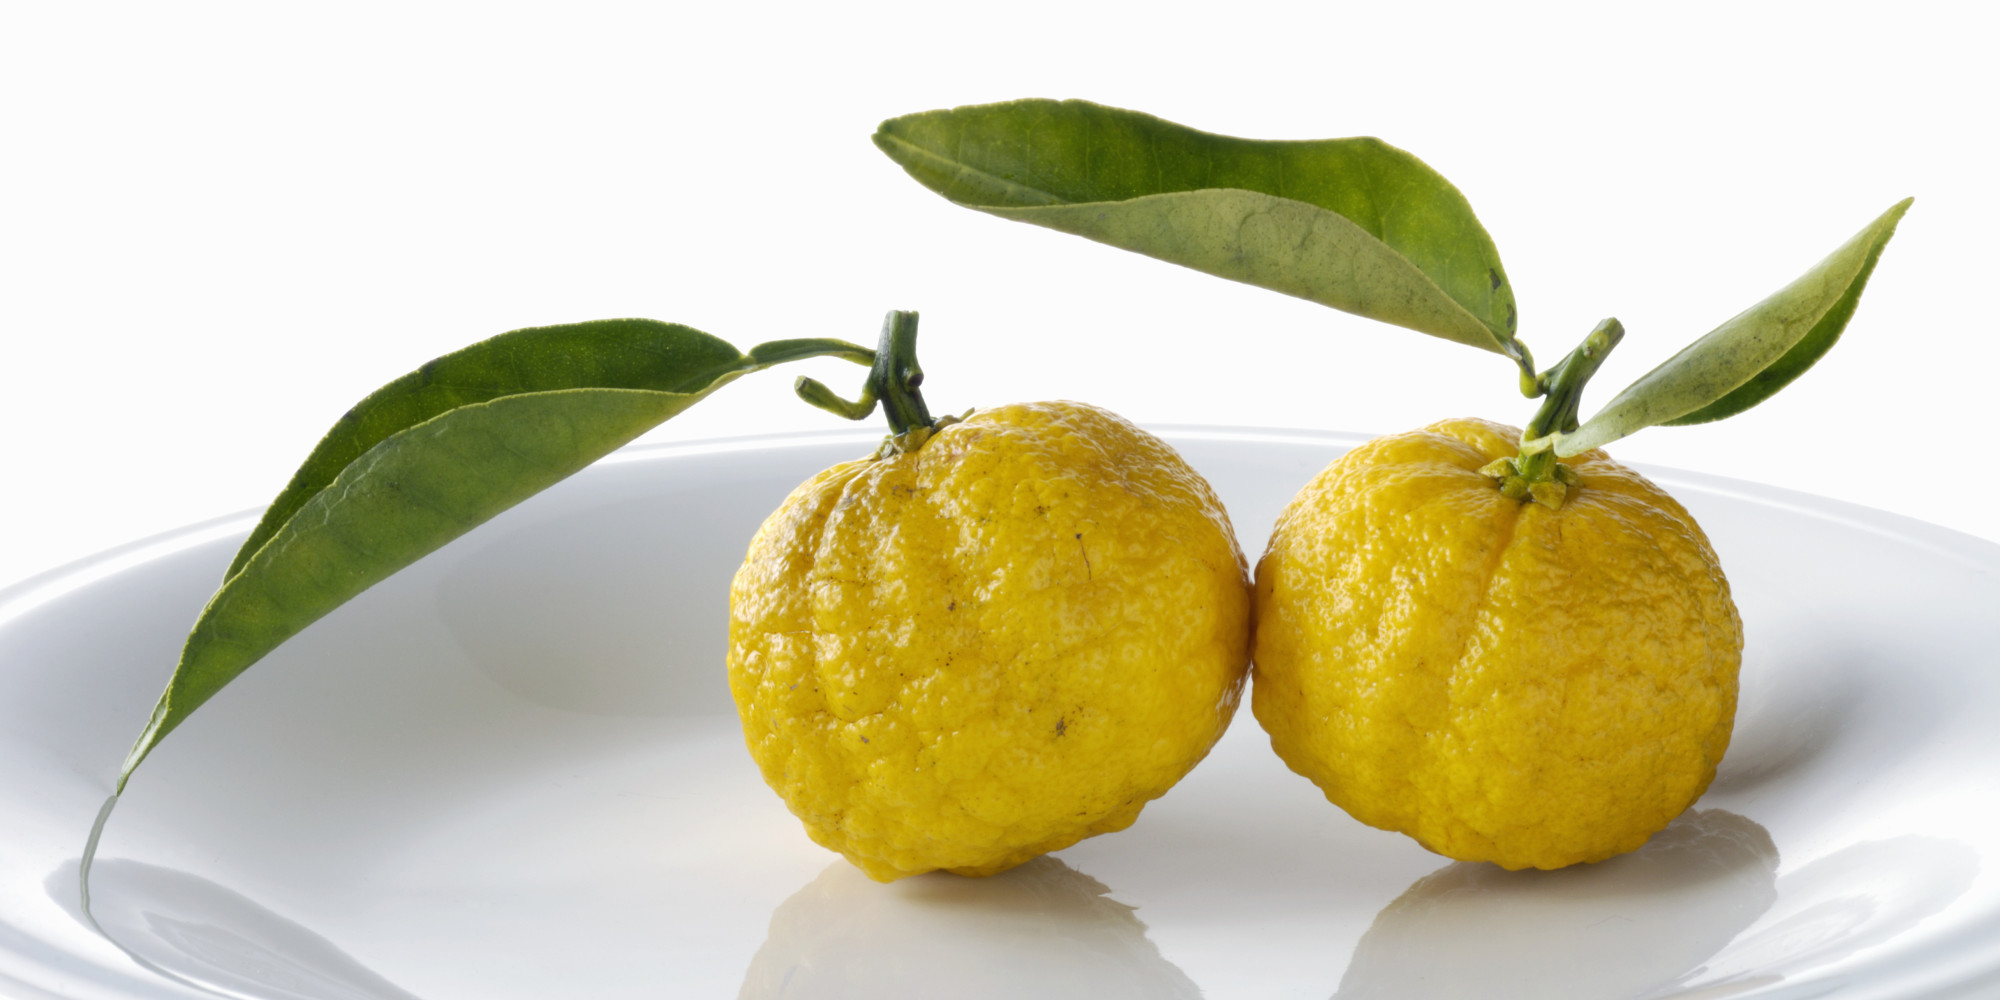 Meet Yuzu, The Amazing Superfood That Has Three Times The Vitamin C Of